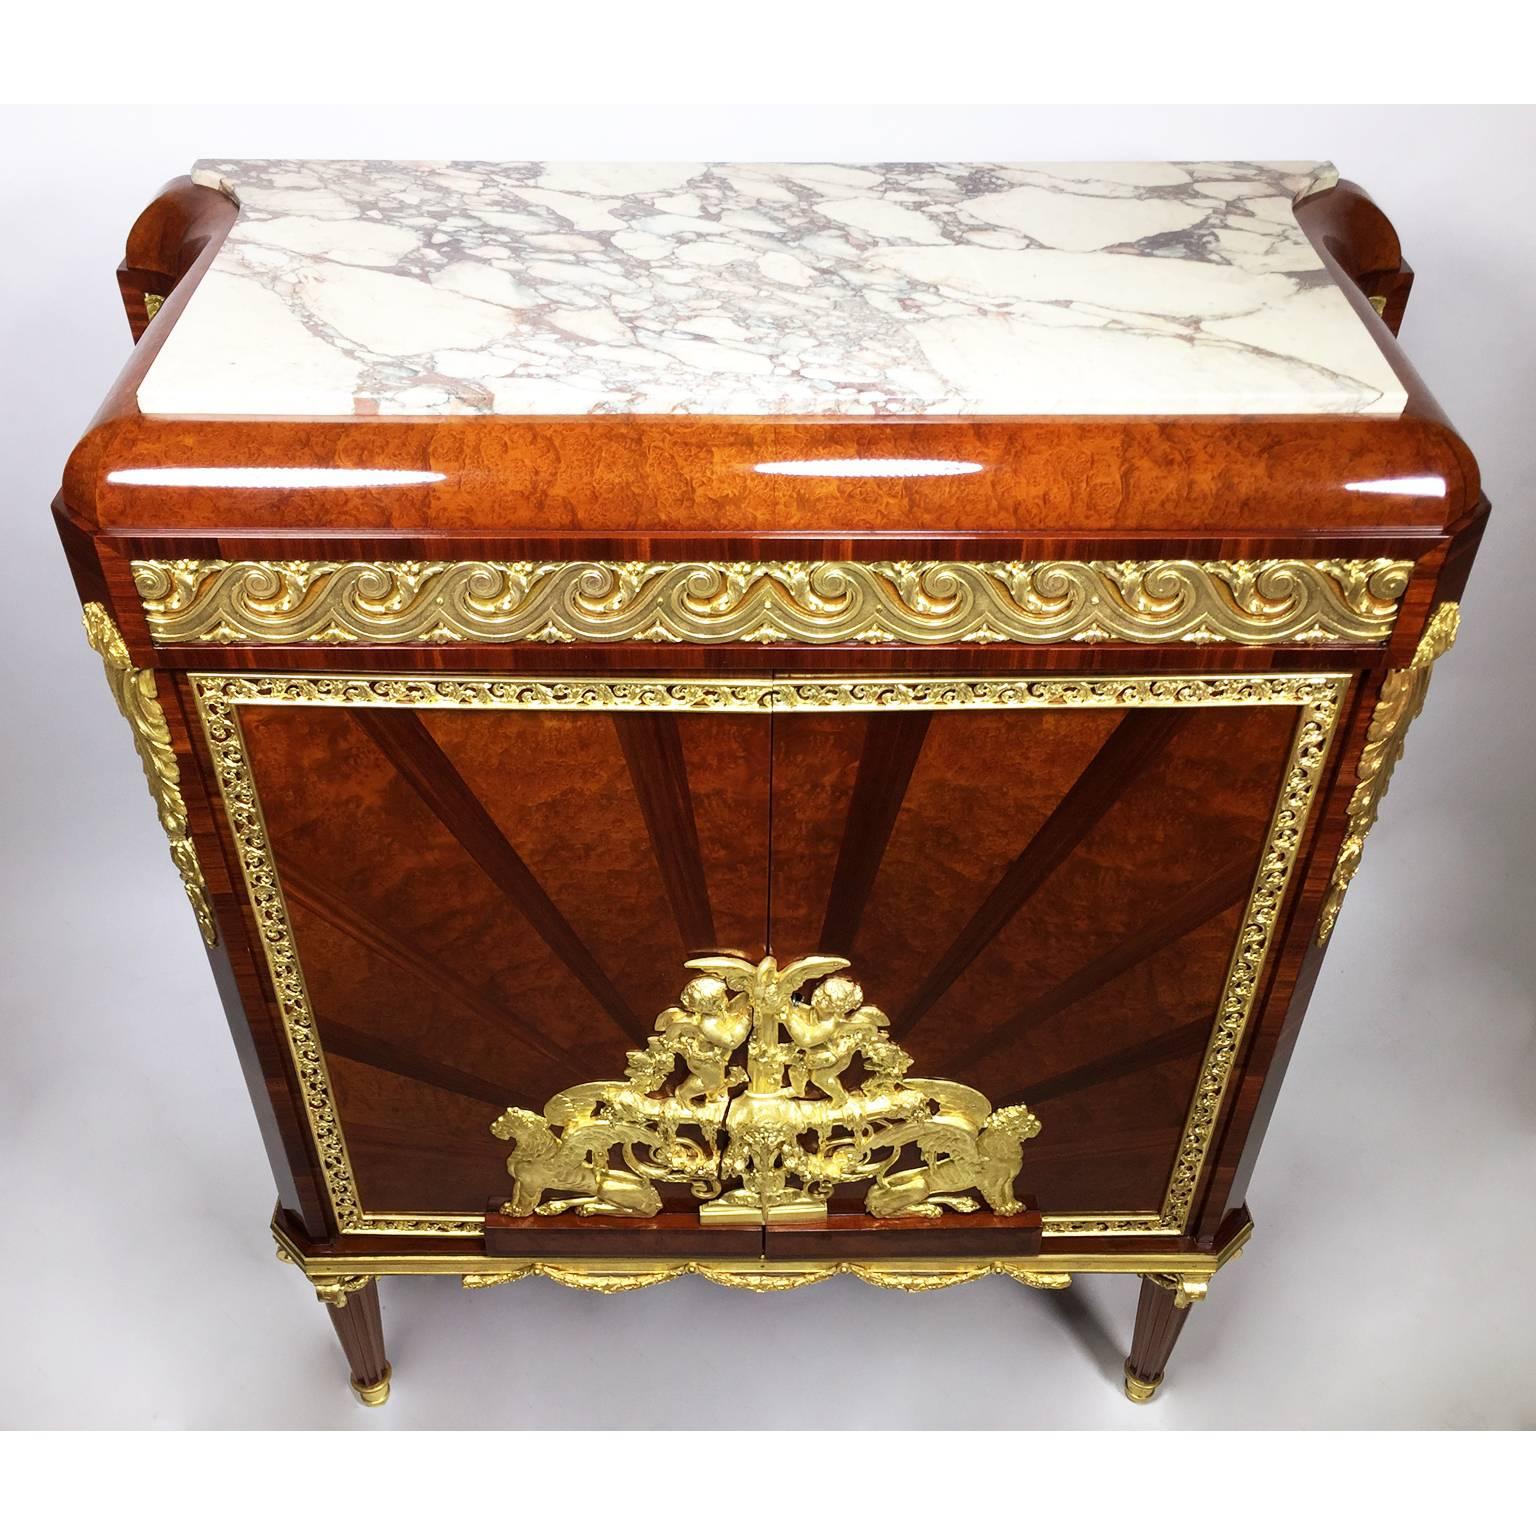 Breccia Marble French 19th-20th Century Louis XVI Style Belle Époque Ormolu-Mounted Cabinet For Sale